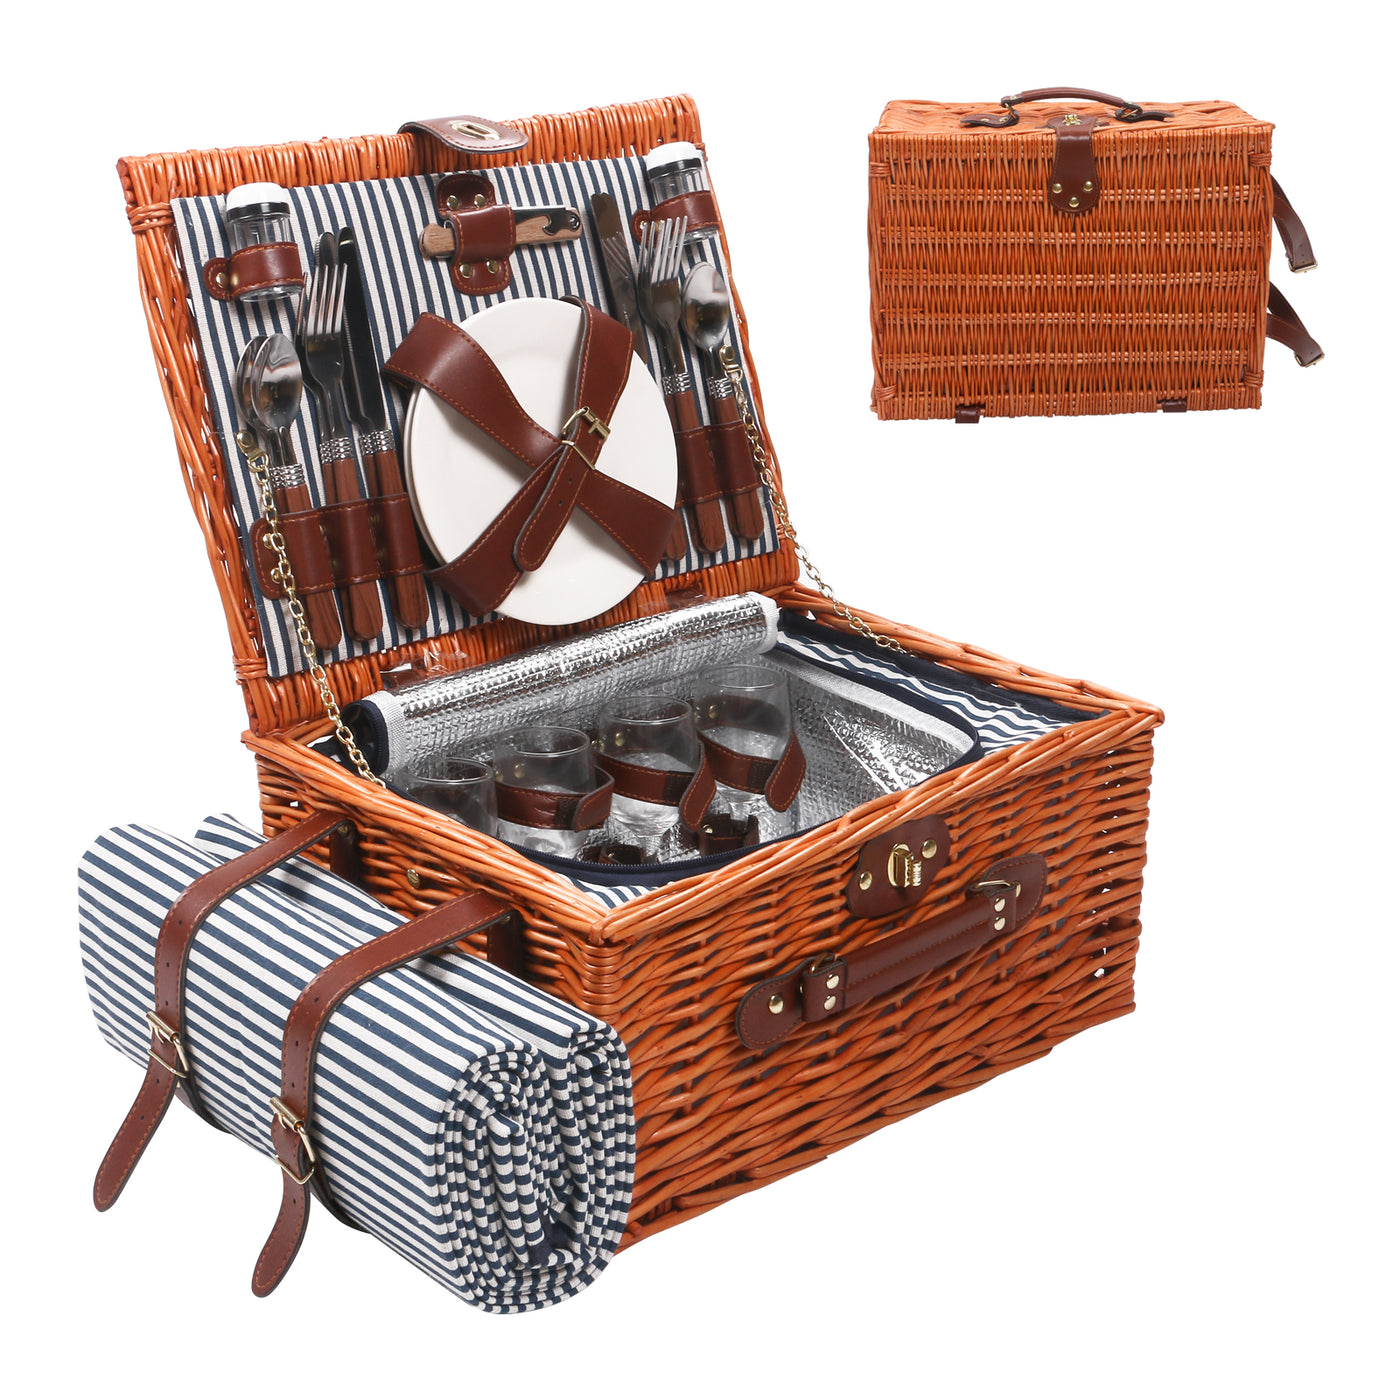 Willow Picnic Basket for 4 Persons with Insulated Compartment, Picnic Basket Sets with Utensils Cutlery Perfect for Valentine Day Wedding, Wicker Hamper for Outdoor Patio Lawn Garden Picnic & Camping